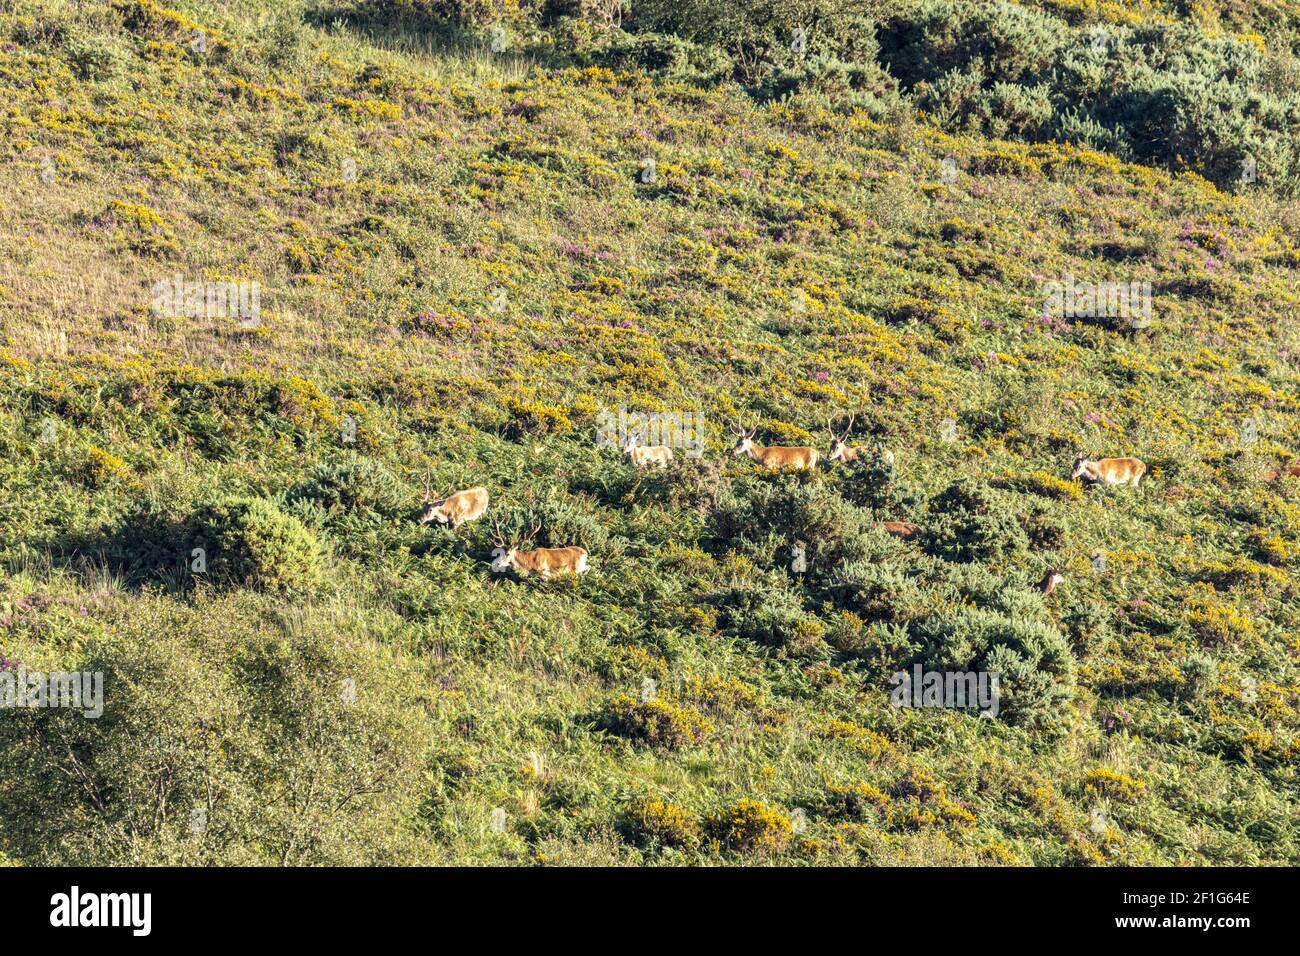 A group of red deer stags grazing in the evening sunshine on the lower slopes of Dunkery Beacon, the highest point on Exmoor, Somerset UK Stock Photo